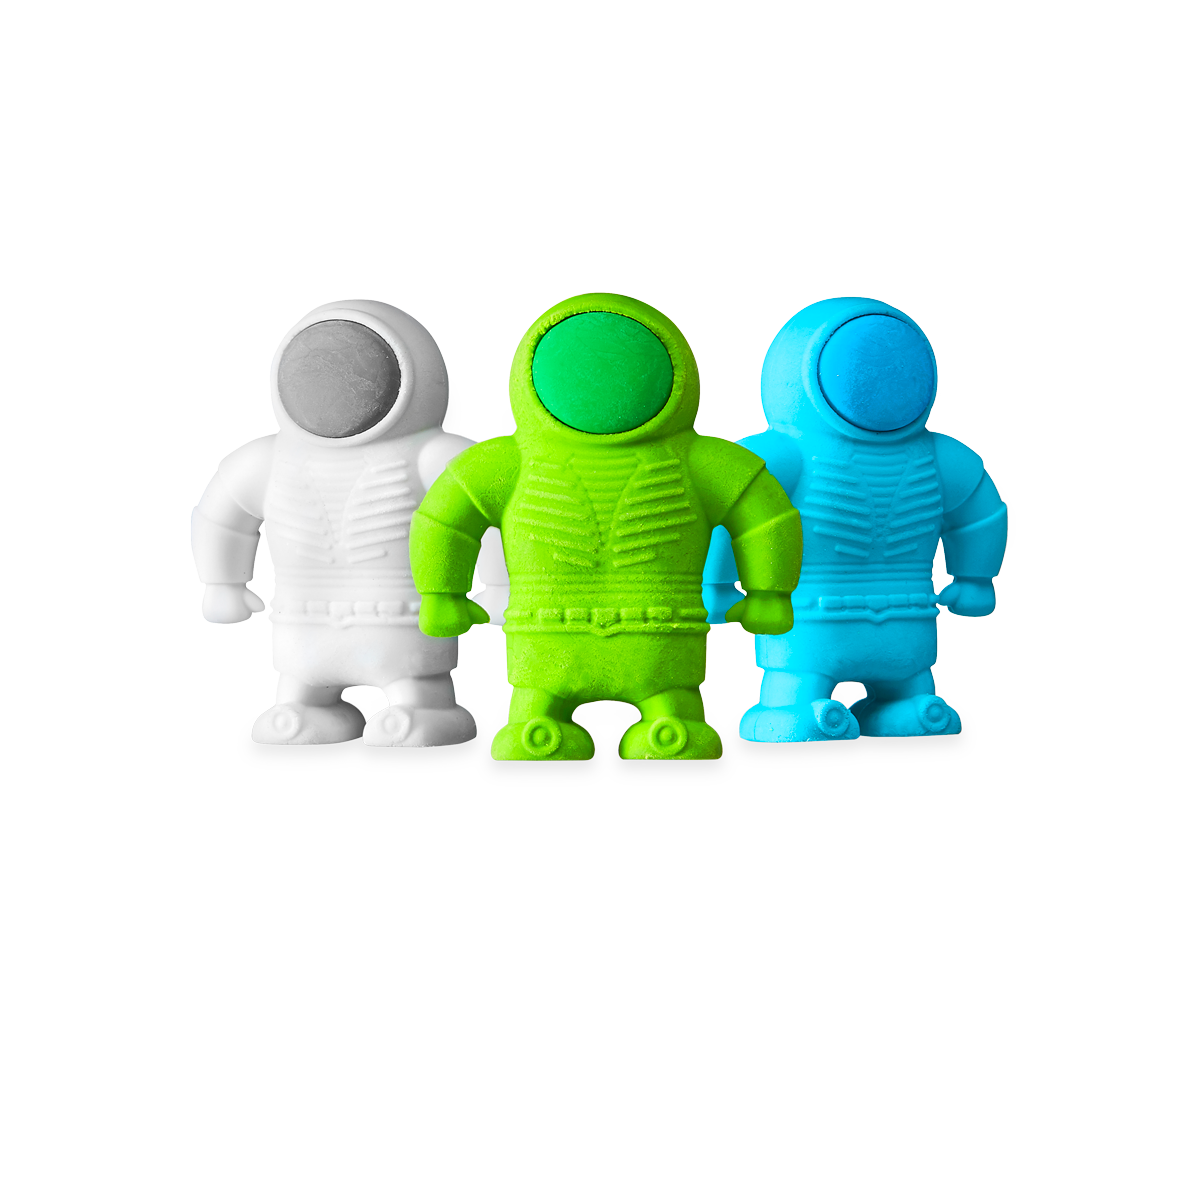 3 Astronaut Erasers shown standing together